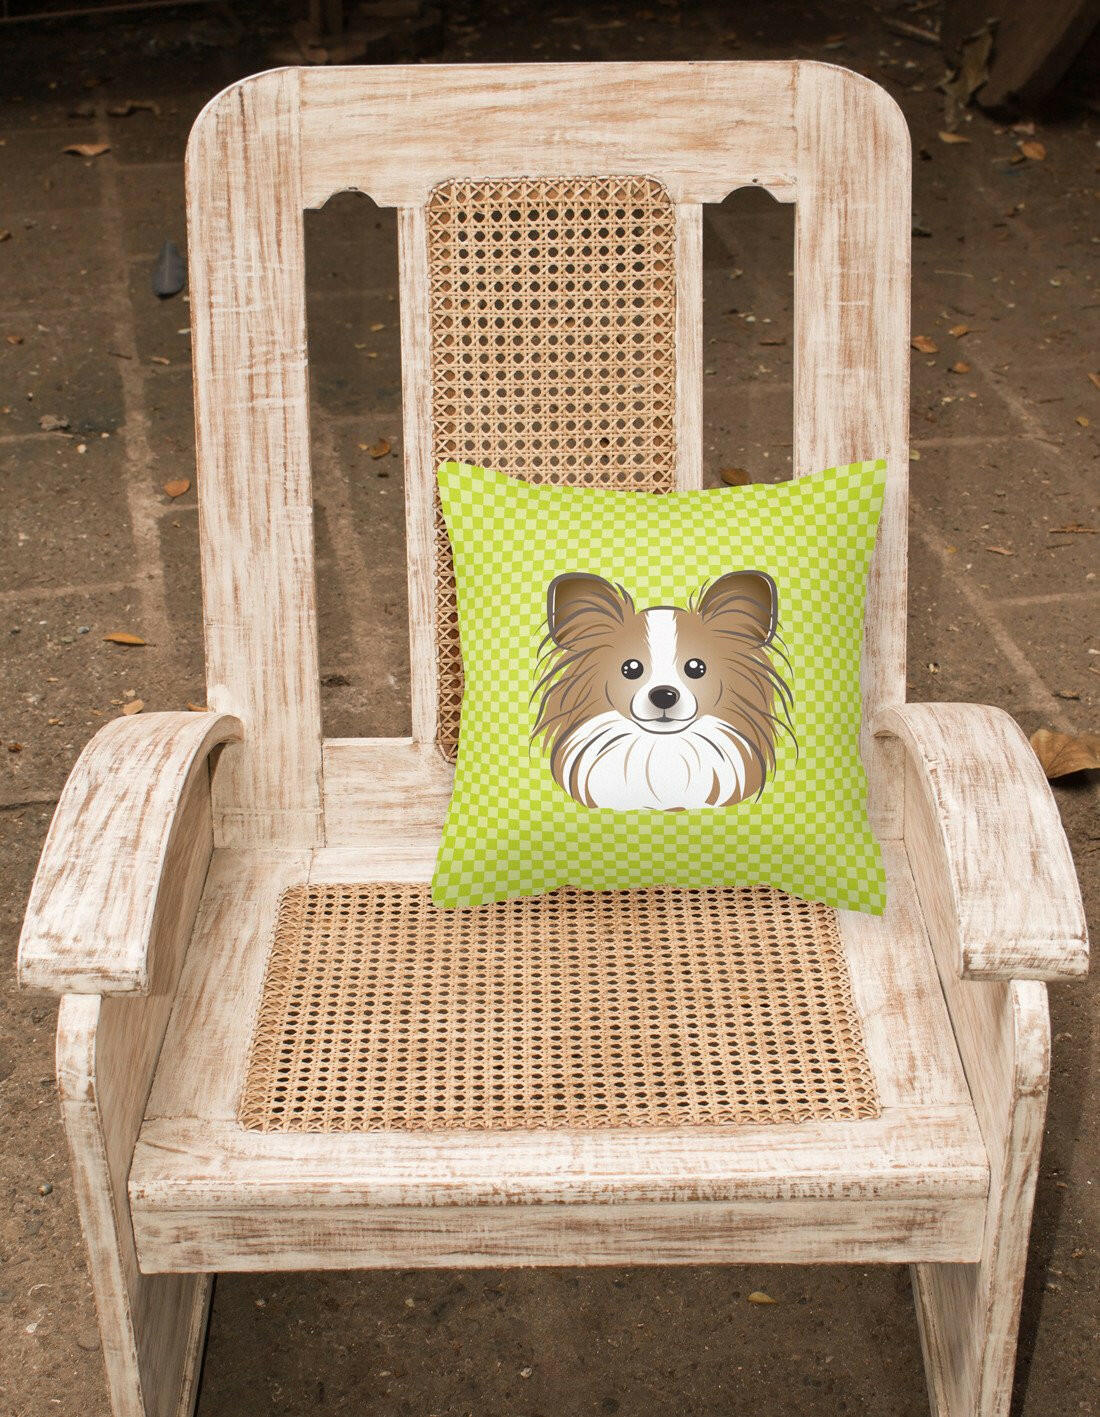 Checkerboard Lime Green Papillon Canvas Fabric Decorative Pillow BB1310PW1414 - the-store.com